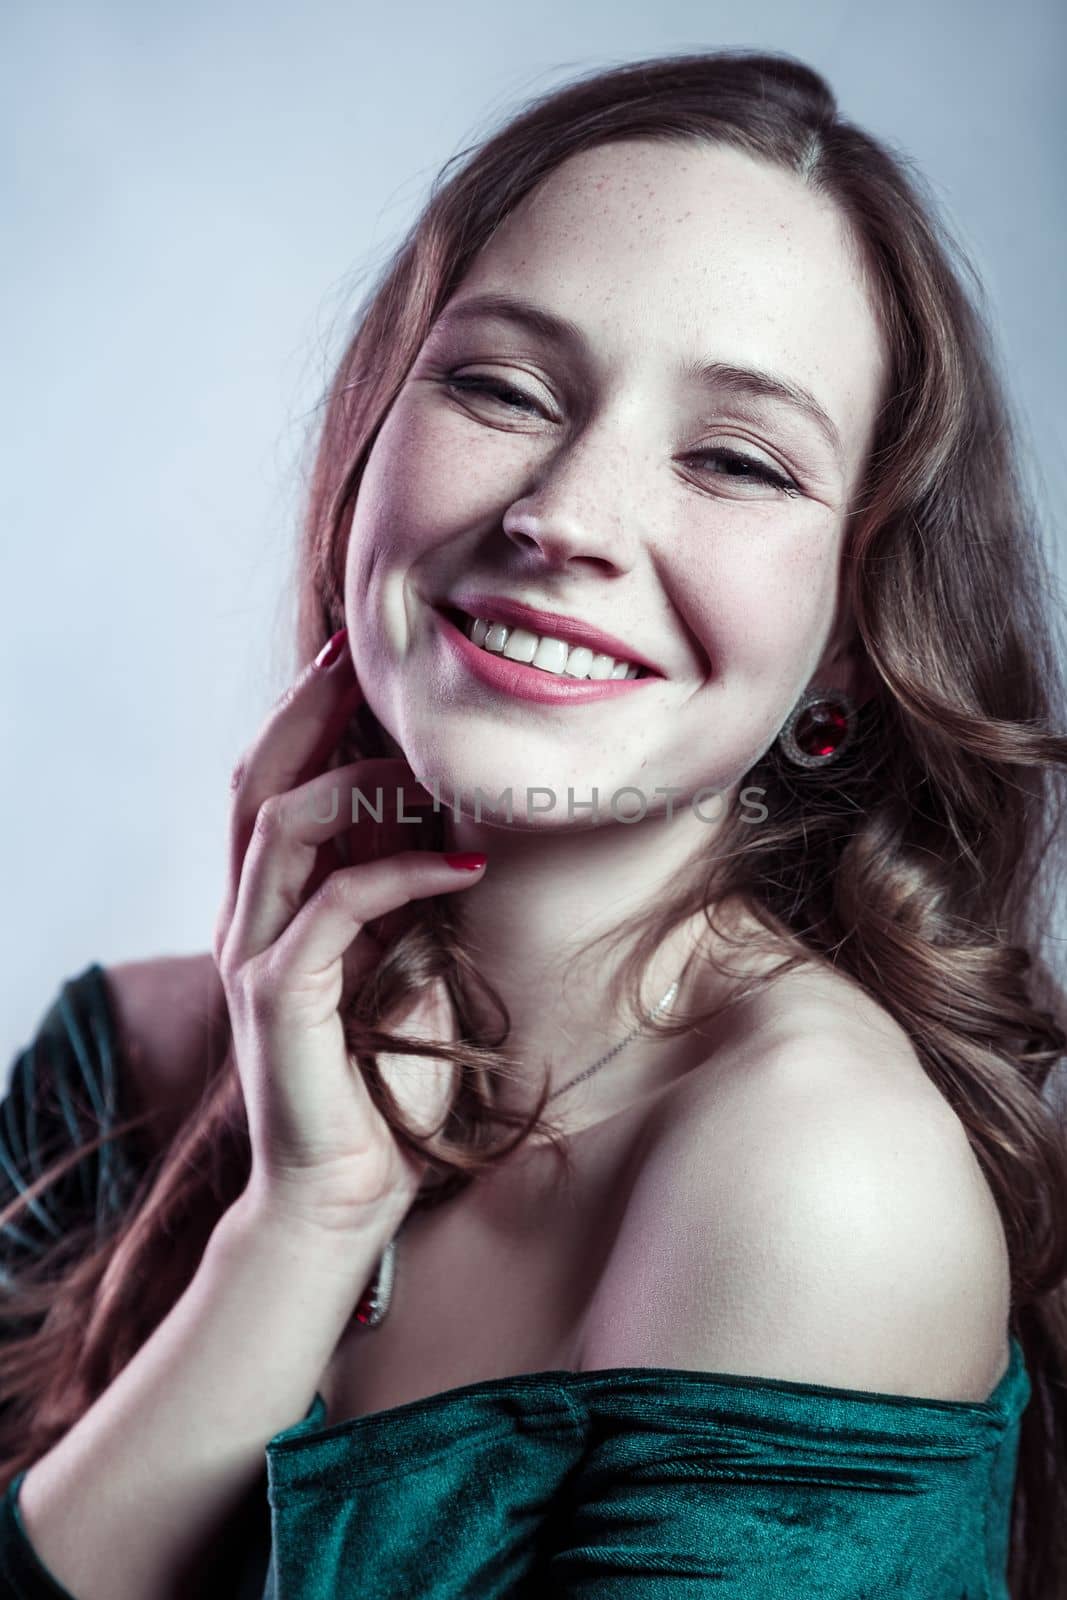 Beauty portrait of smiling positive satisfied elegant woman with wavy hair wearing green dress looking at camera with toothy smile. Indoor studio shot isolated on gray background.